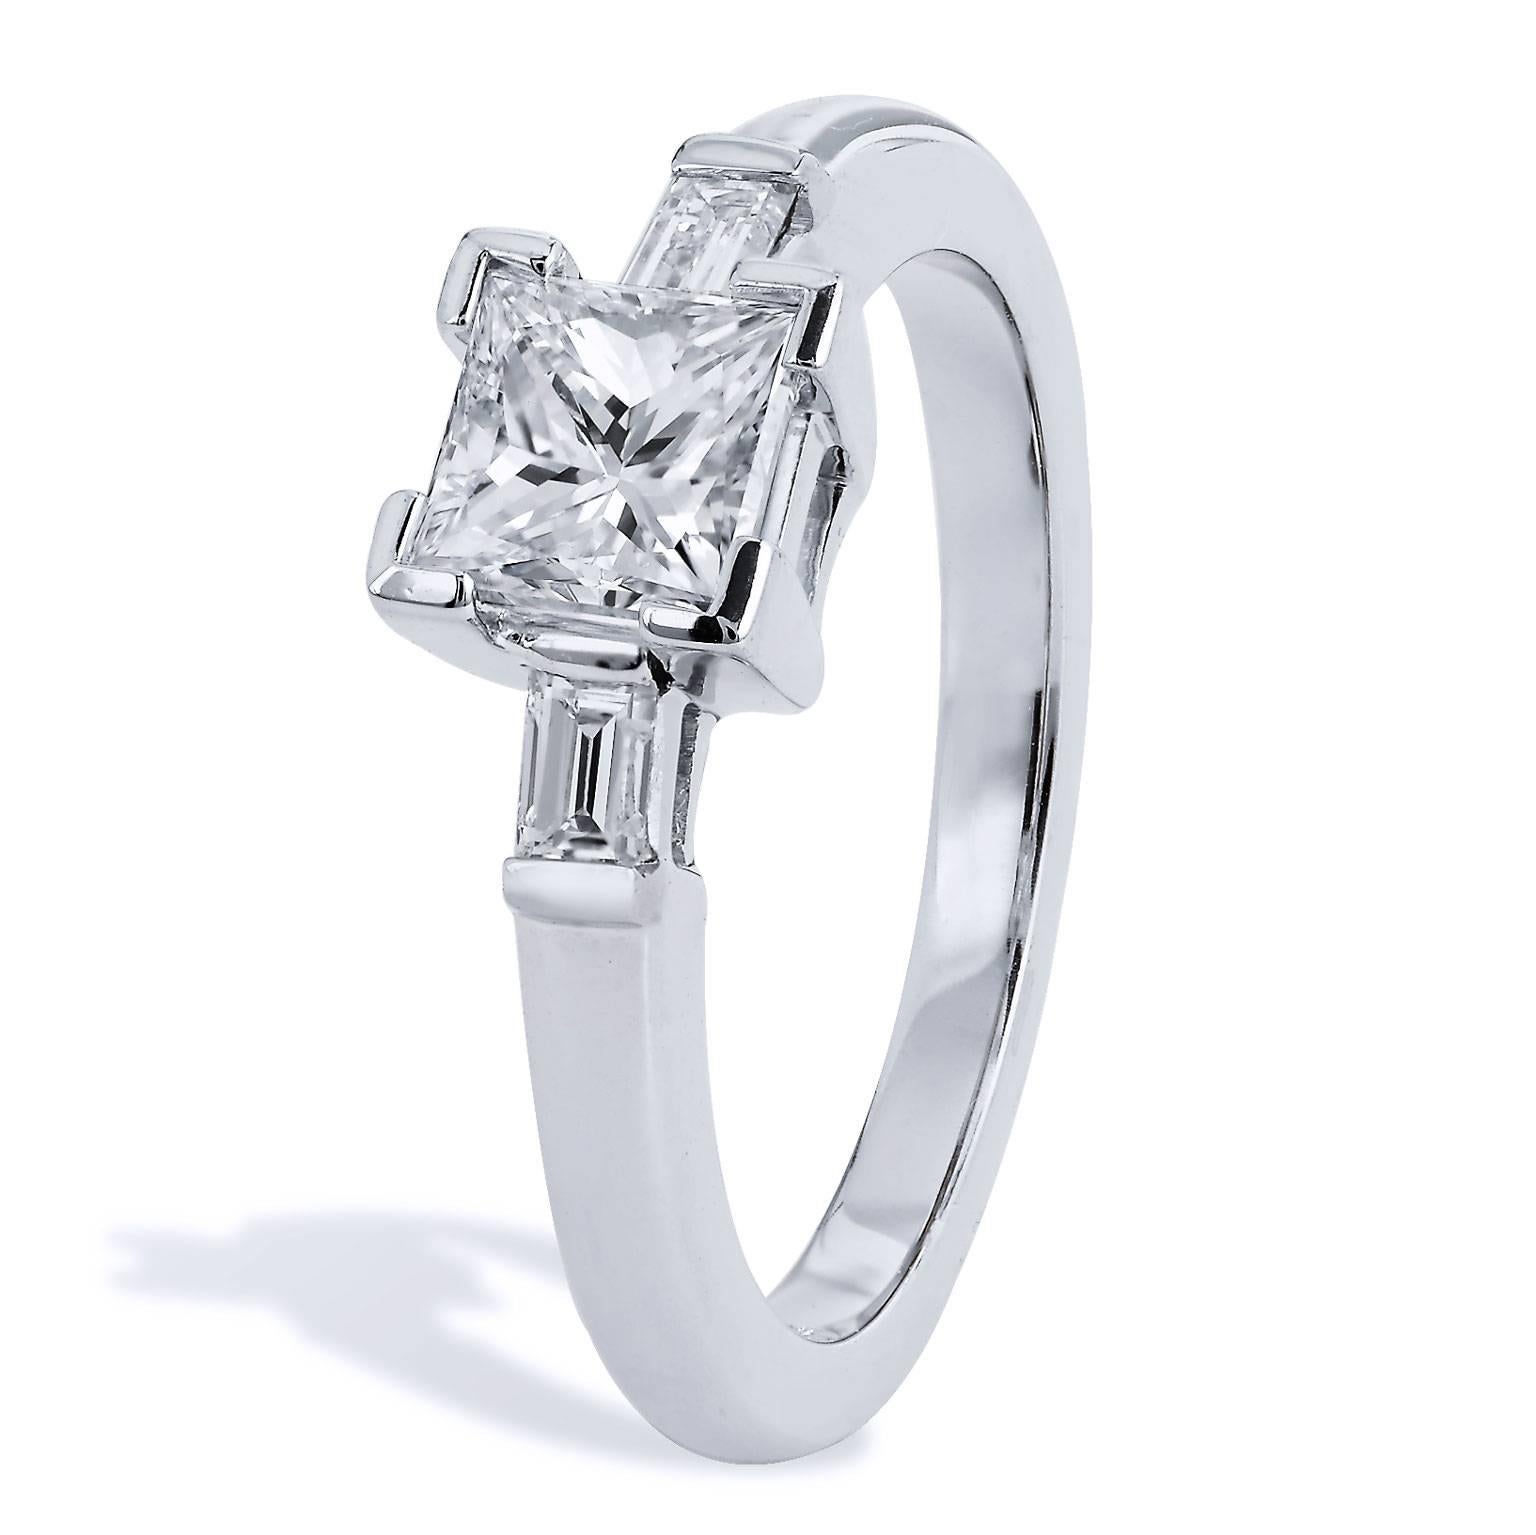 GIA Certified Princess Cut Three-Diamond Side Baguette Engagement Ring

Refined and minimal in design, this spectacular three-diamond 14 karat white gold engagement ring features a 0.92 carat Princess cut diamond affixed at center (G/SI1; GIA